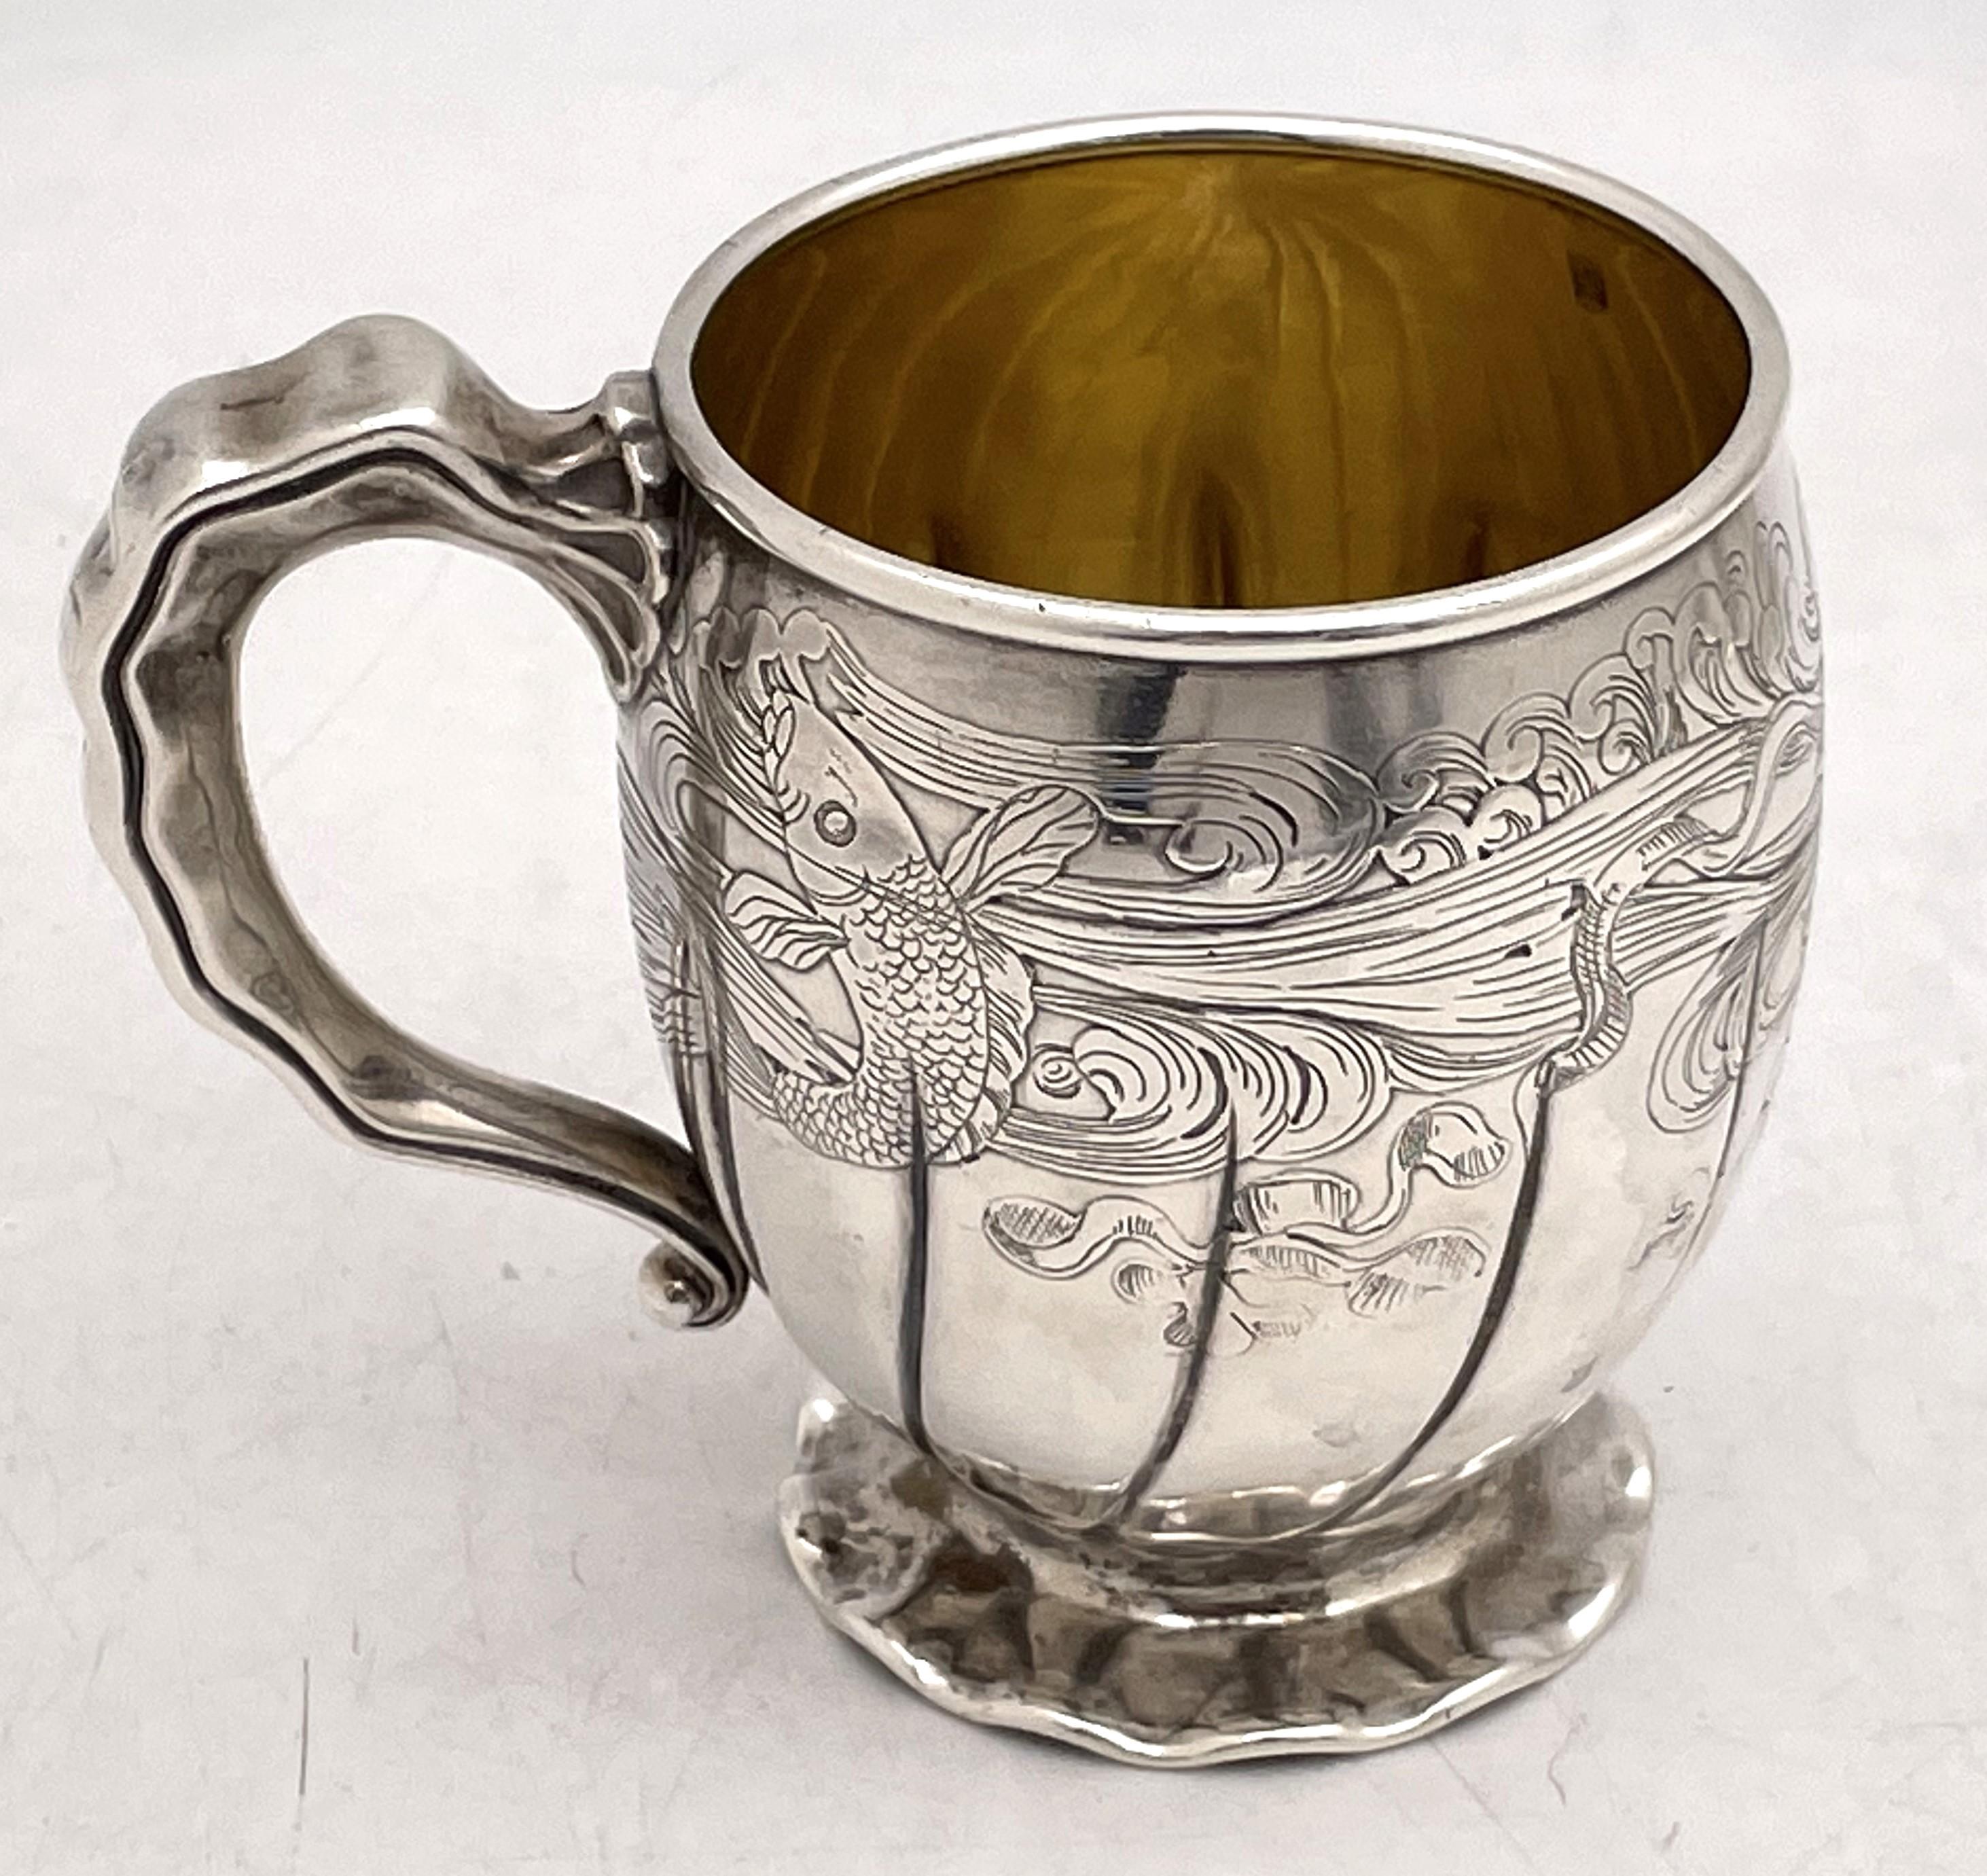 American Gorham 1880 Sterling Silver Etched Child's Christening Mug with Aquatic Motifs For Sale